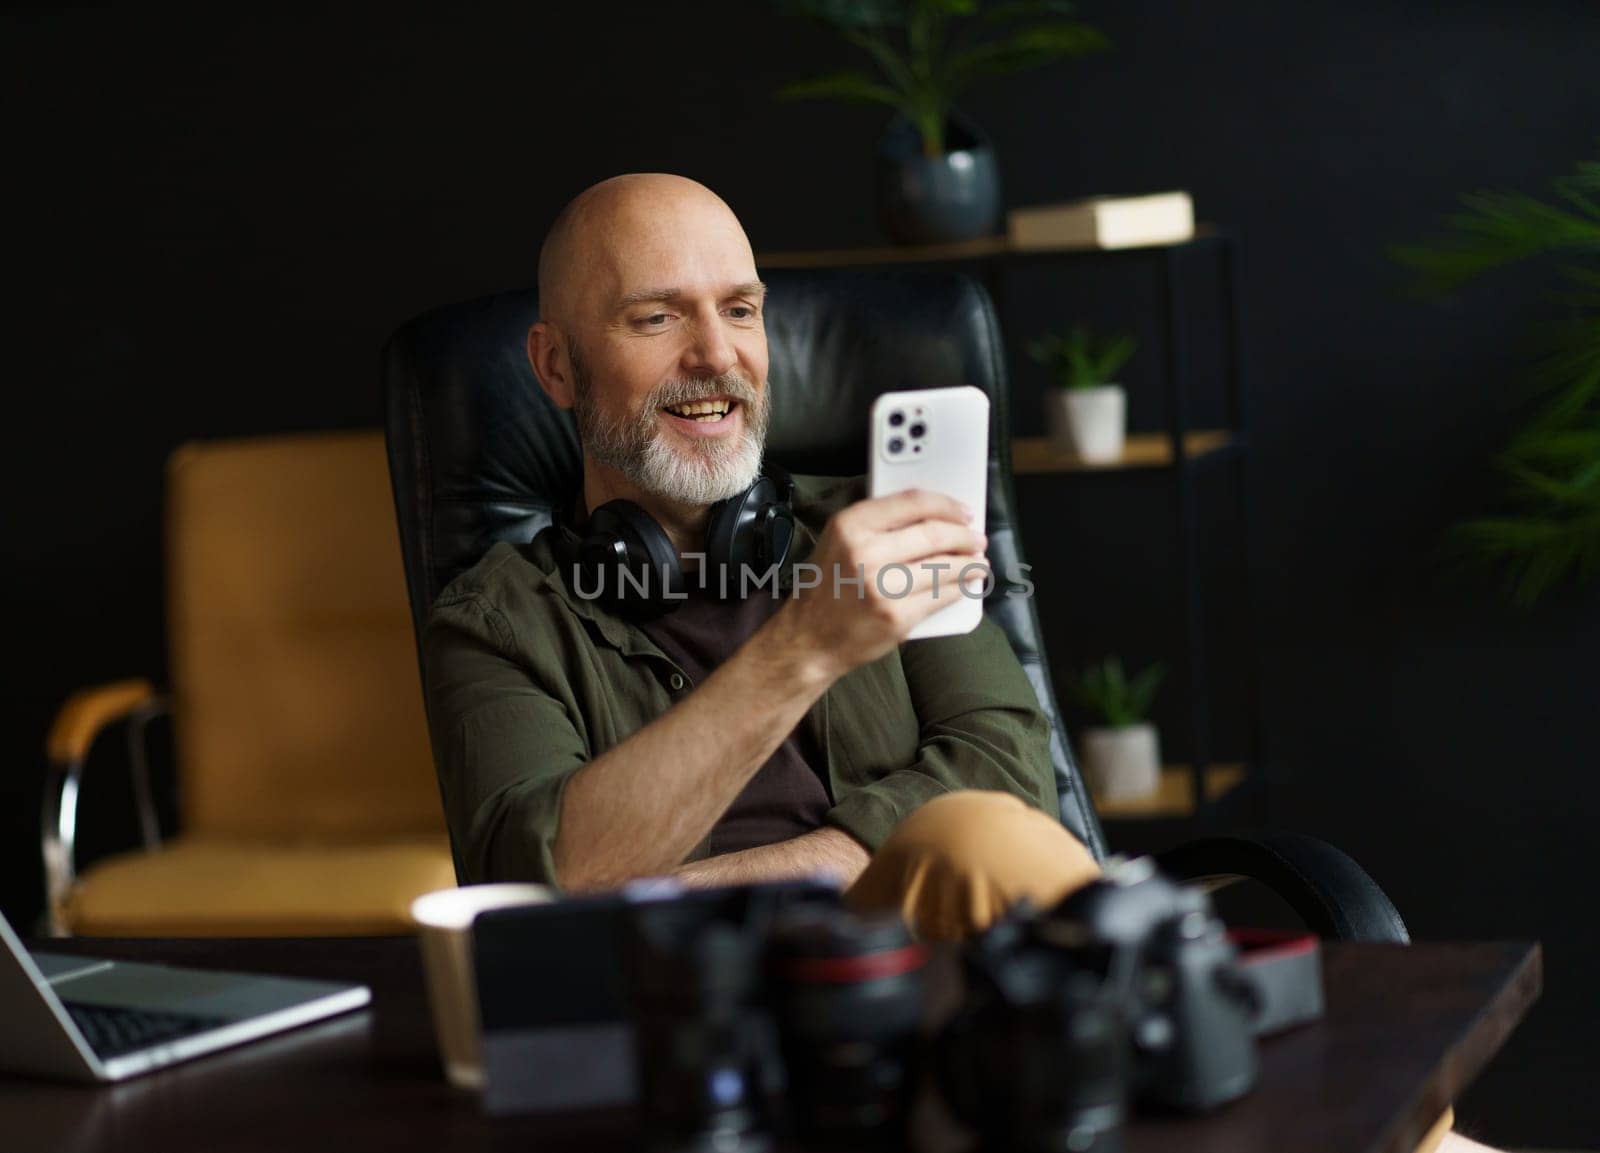 Mid aged man with bald head and silver beard engrossed in reading news on mobile phone. With laptop placed on desk in background, image captures essence of connected and digitally-oriented lifestyle. by LipikStockMedia